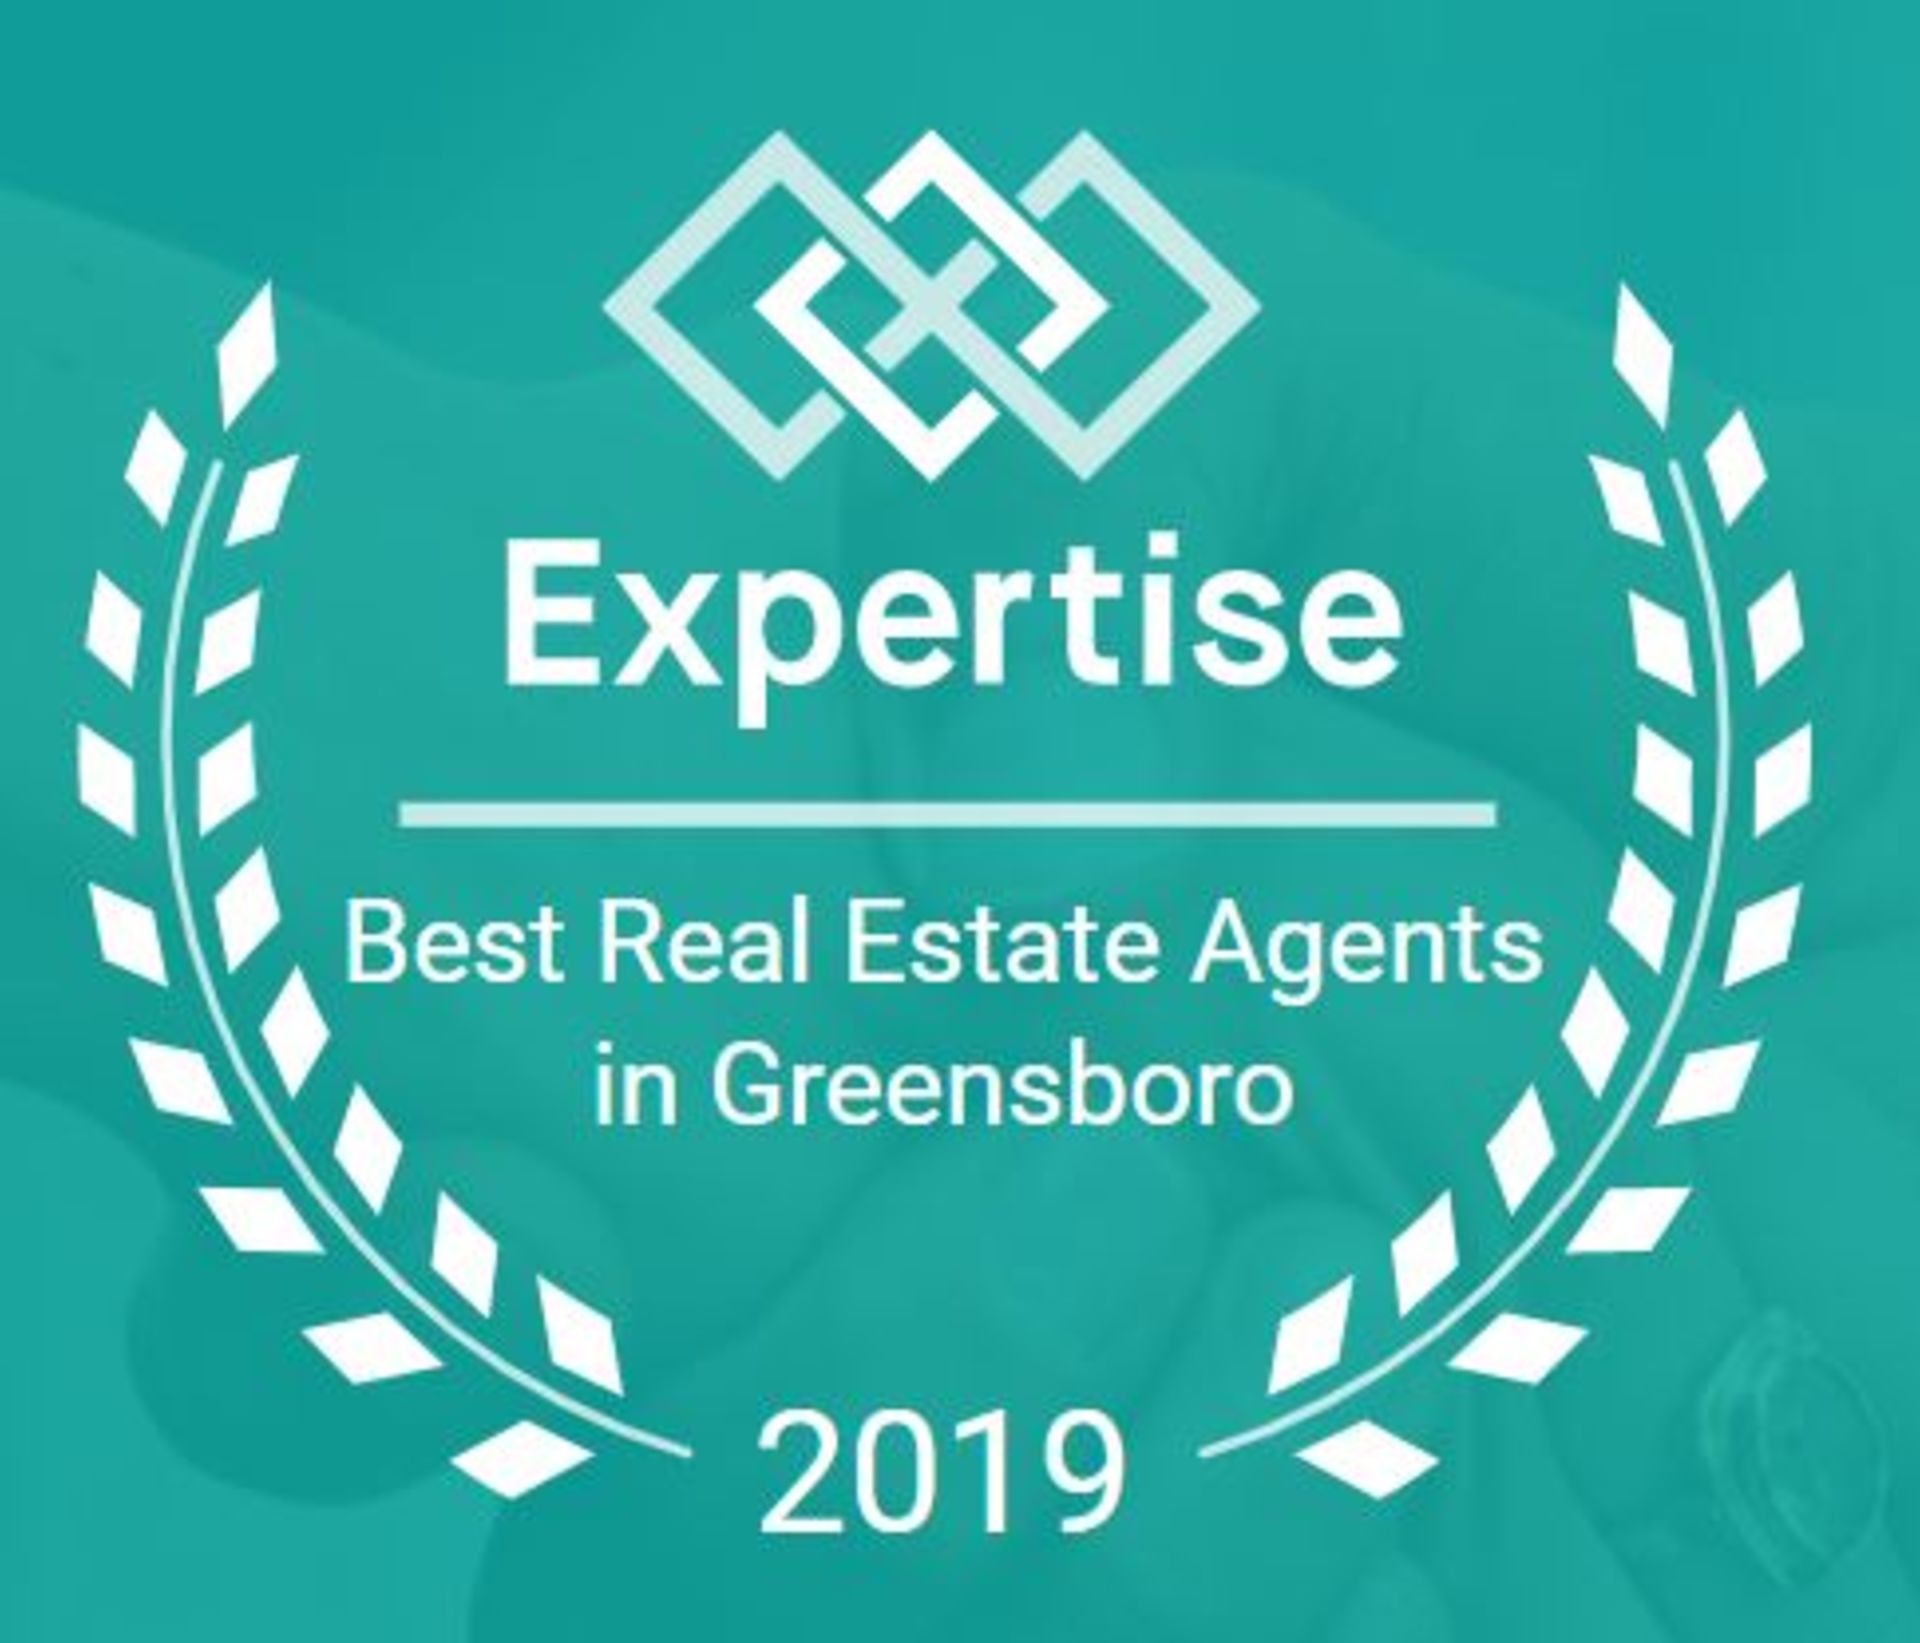 Best Real Estate Agents in Greensboro